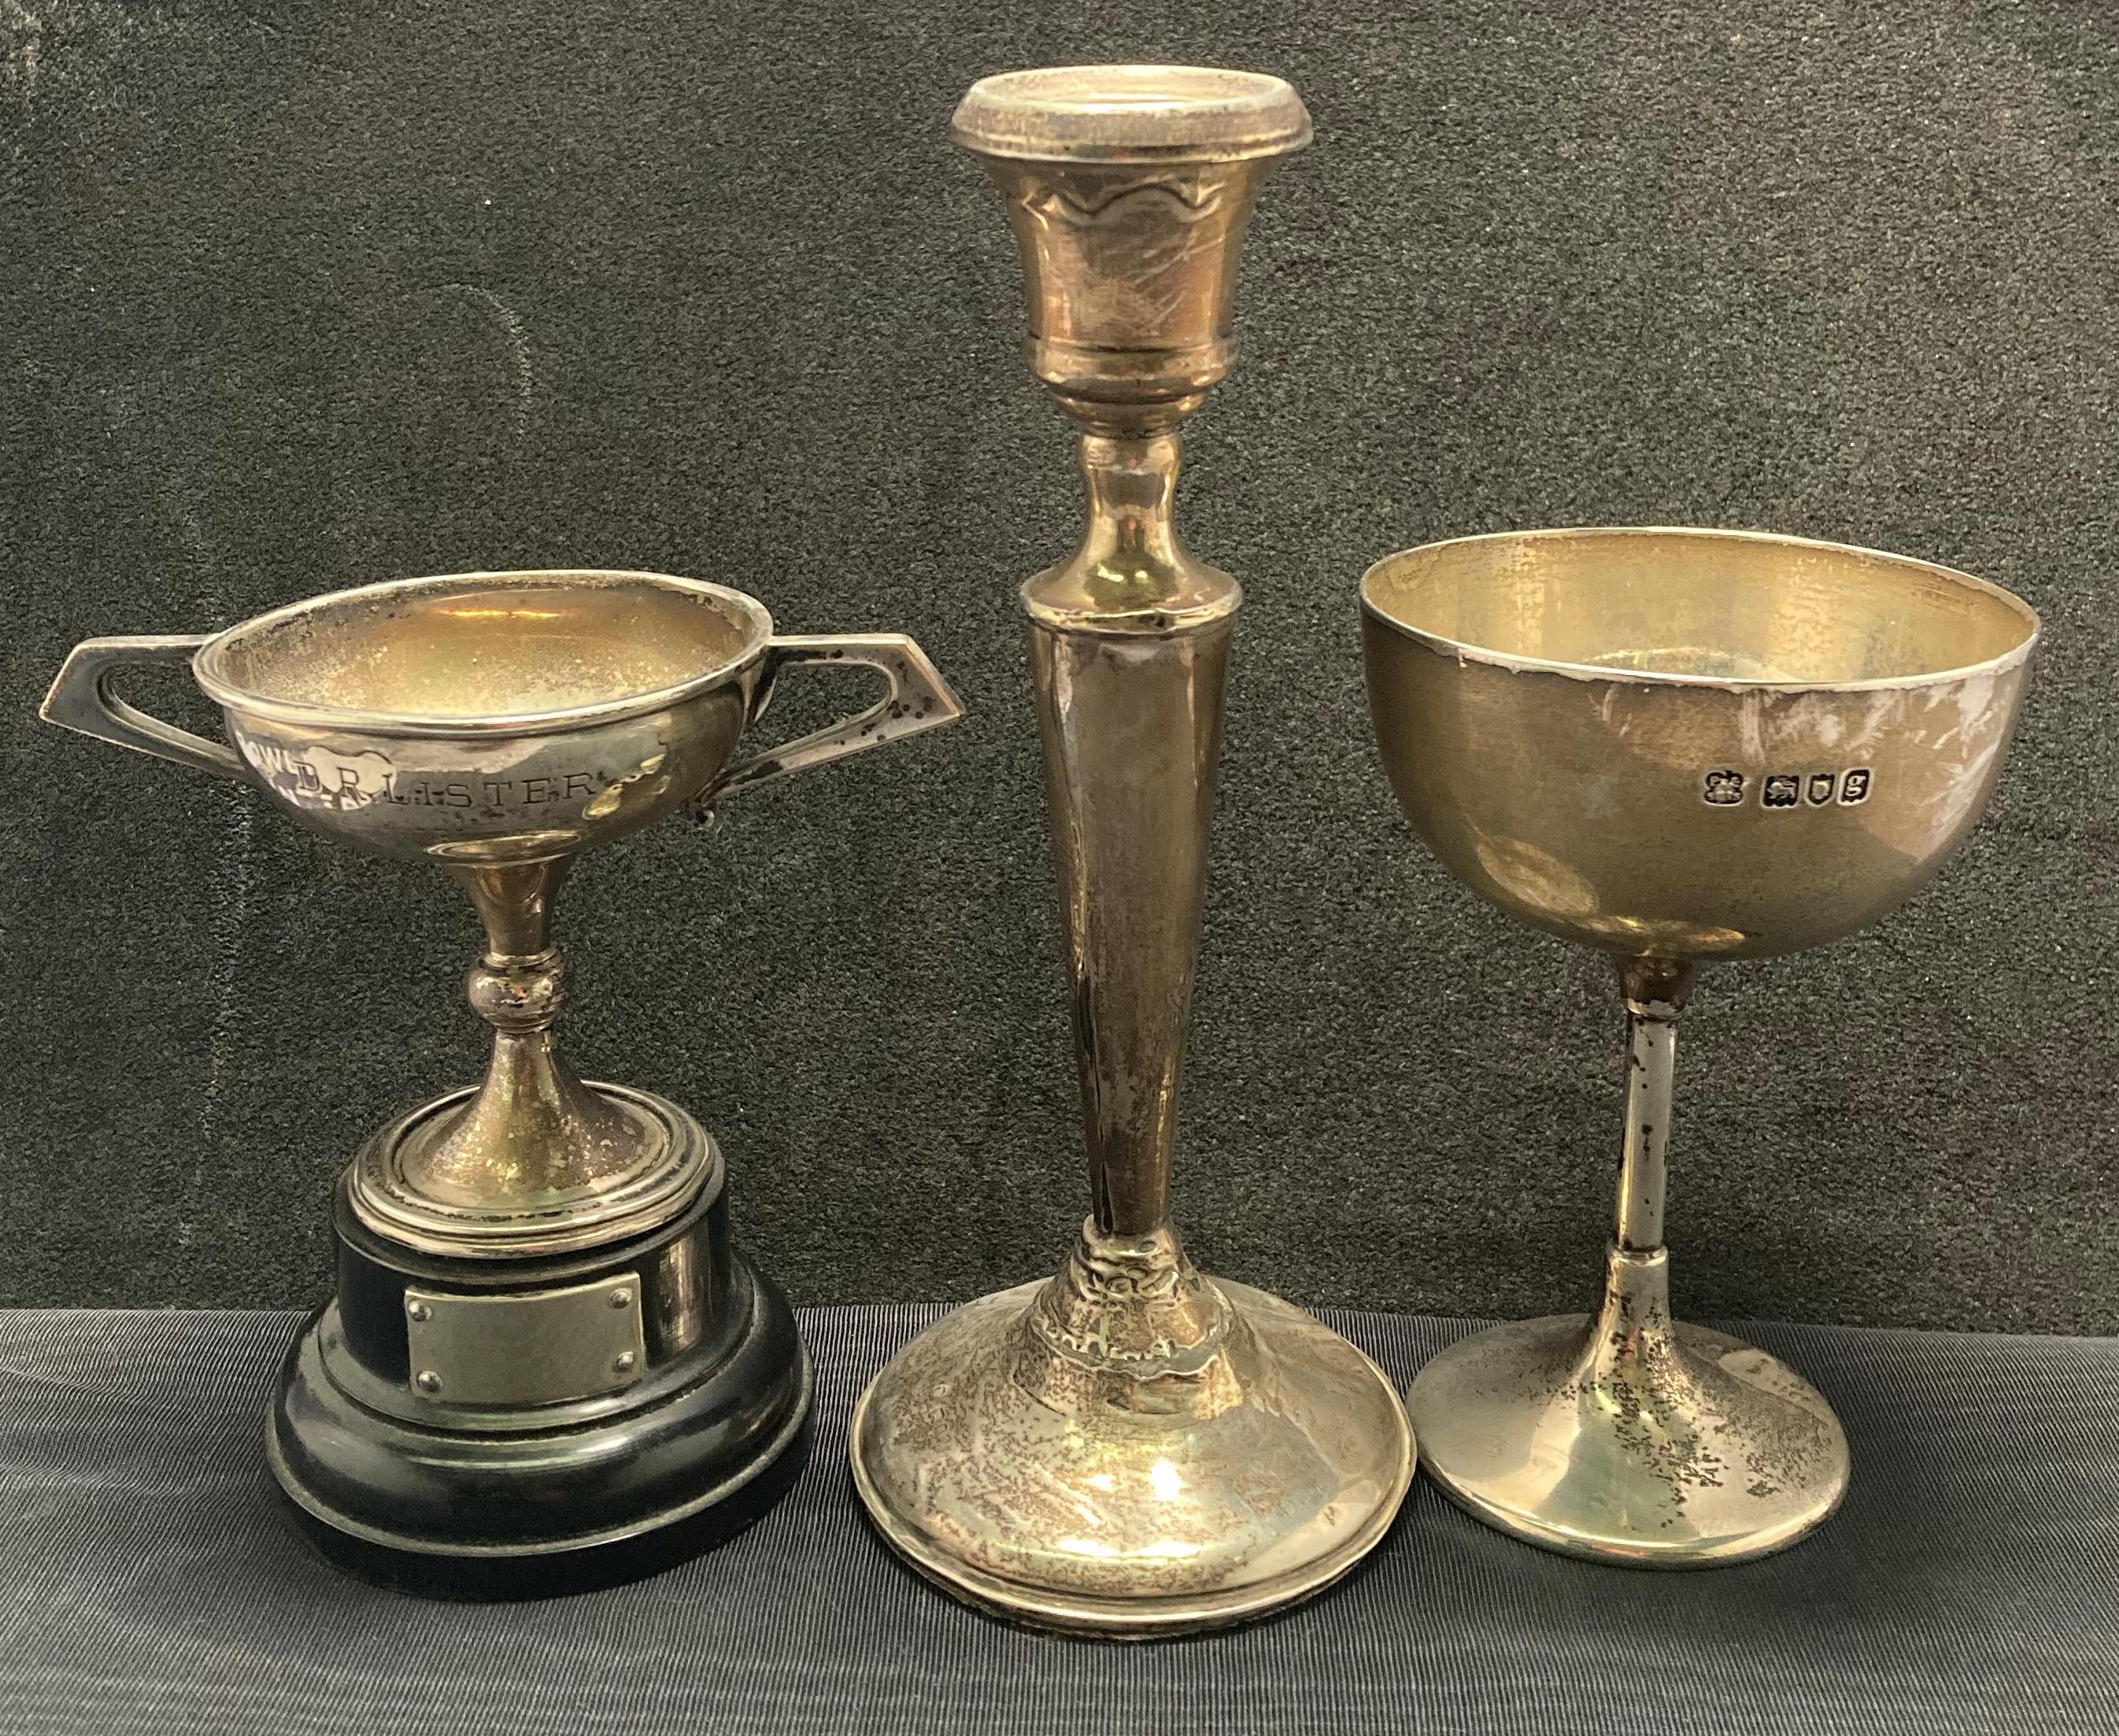 Two silver [hallmarked] trophies (1902 & 1923) and silver [hallmarked] candle stick holder with